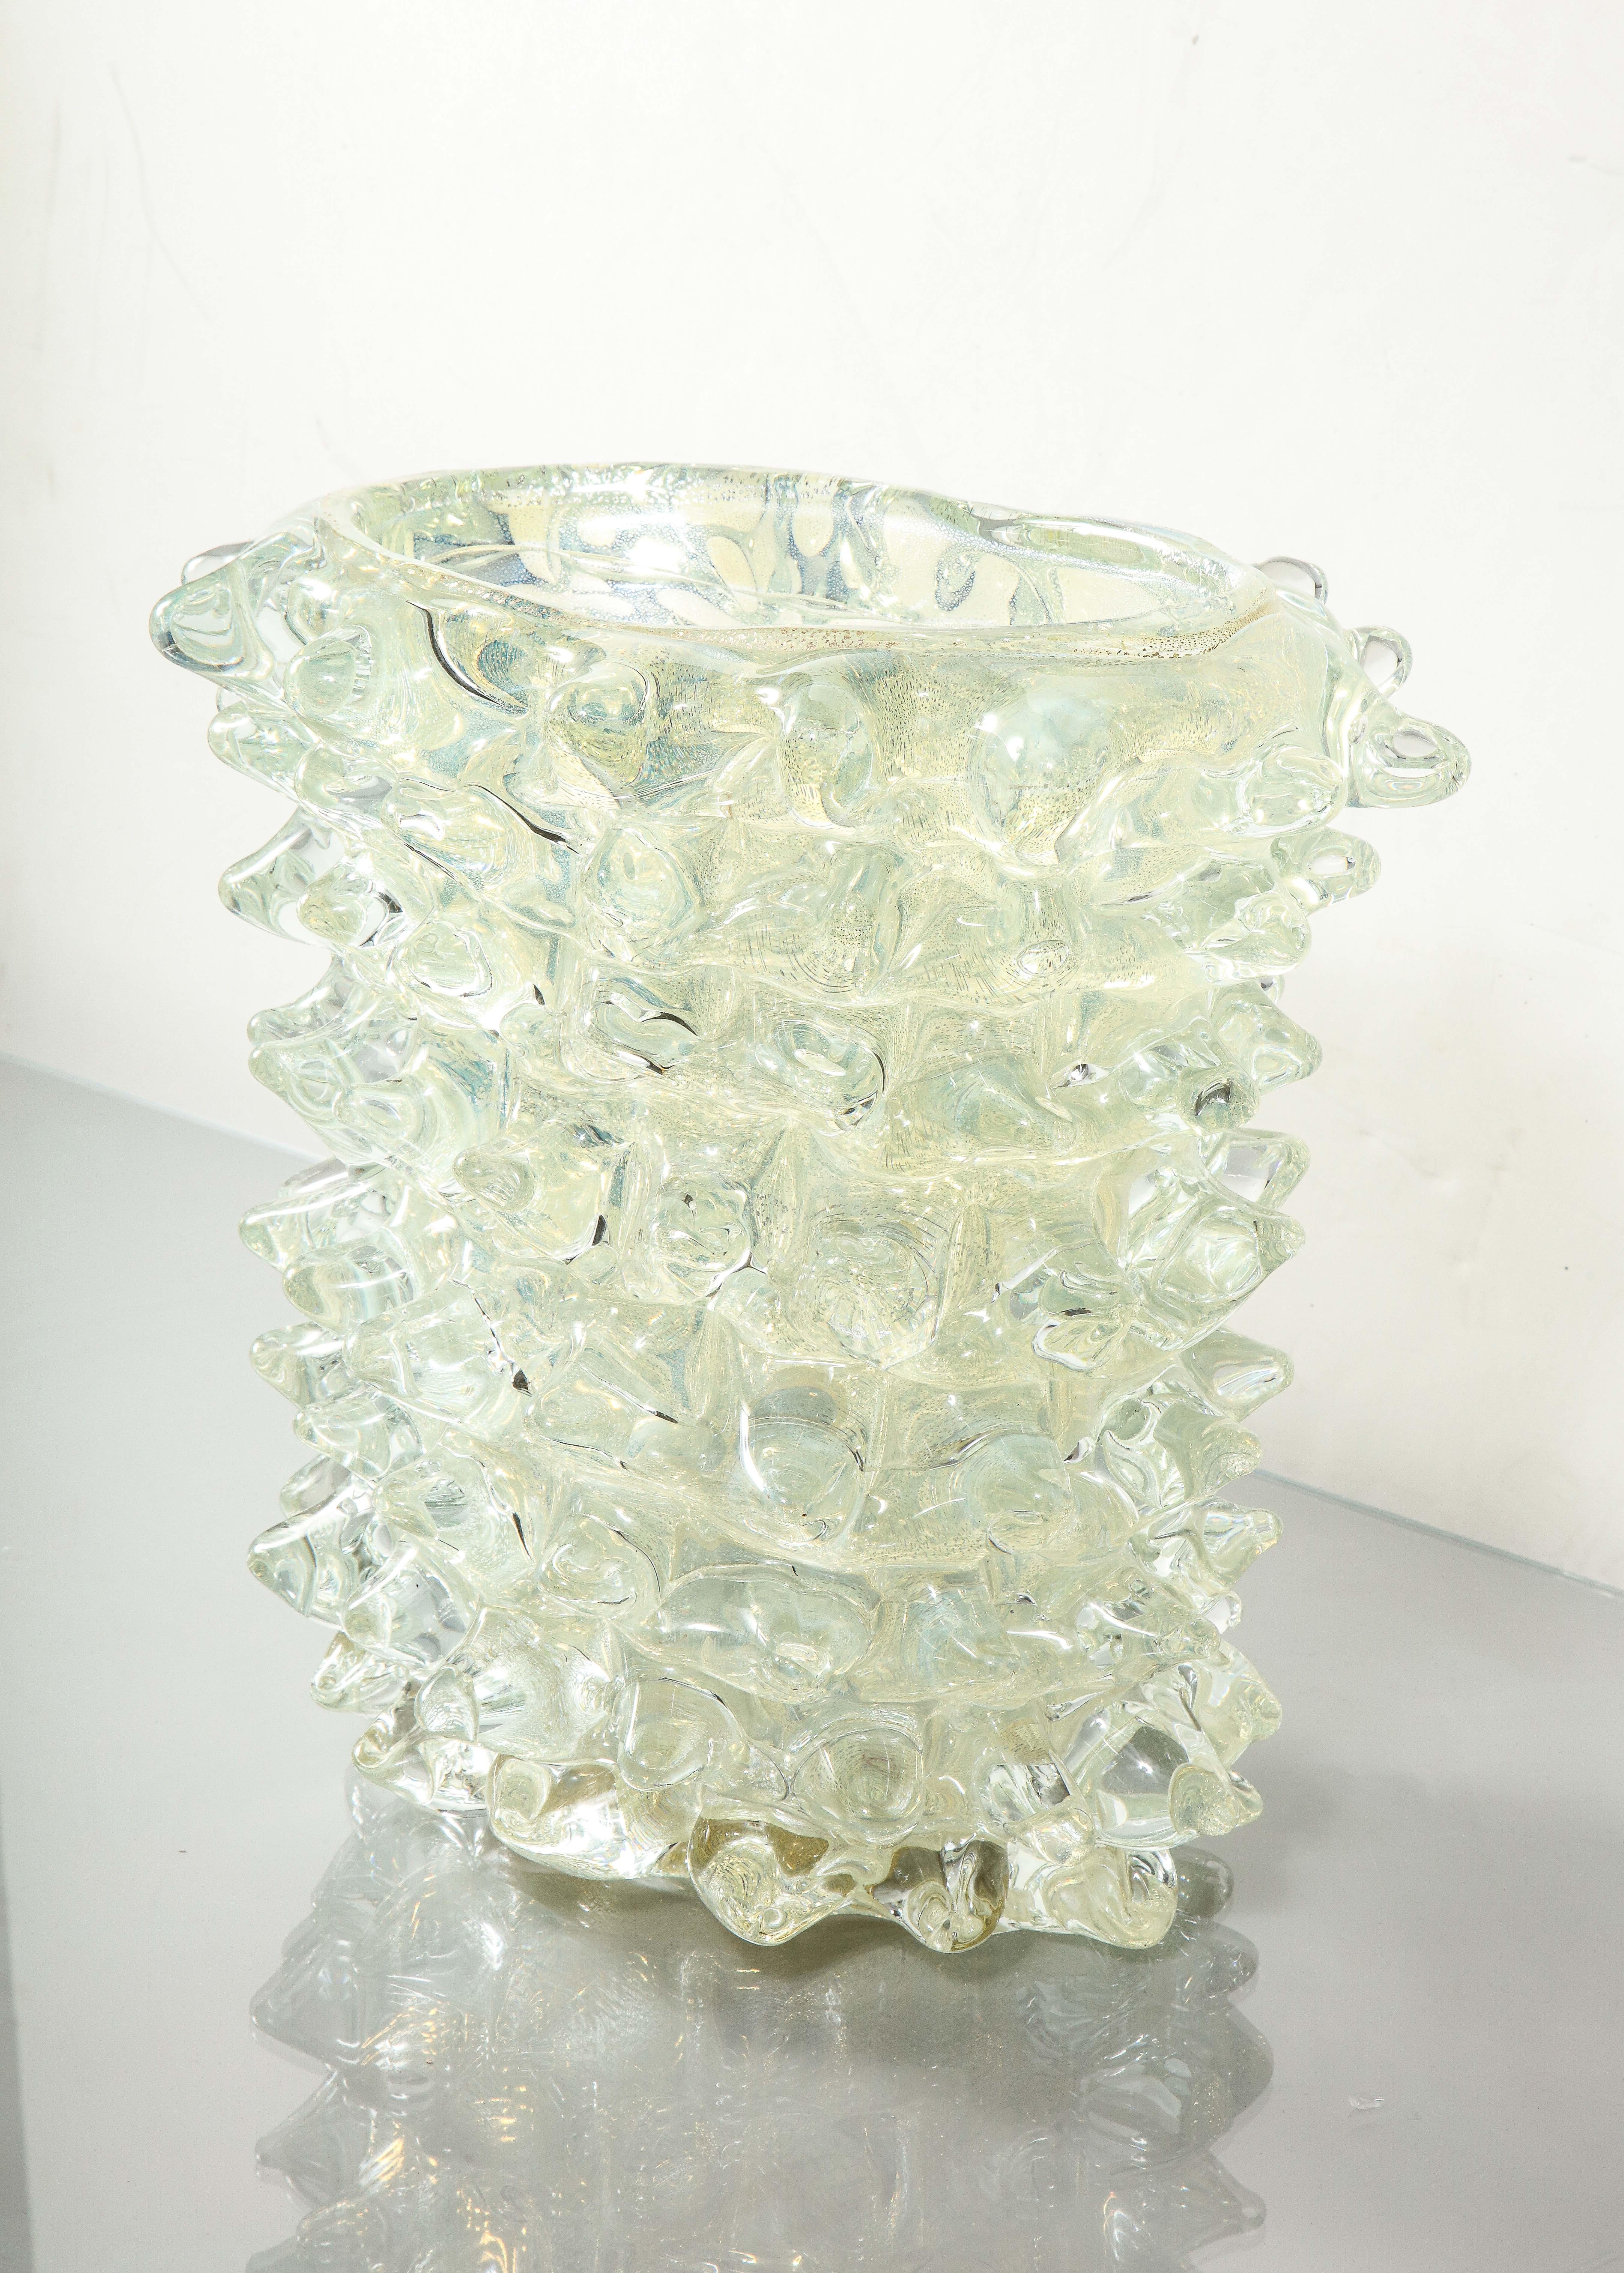 Hand-blown, mid-century style, silver opalescent glass vase with spike design in the manner of Barovier, Italy.

